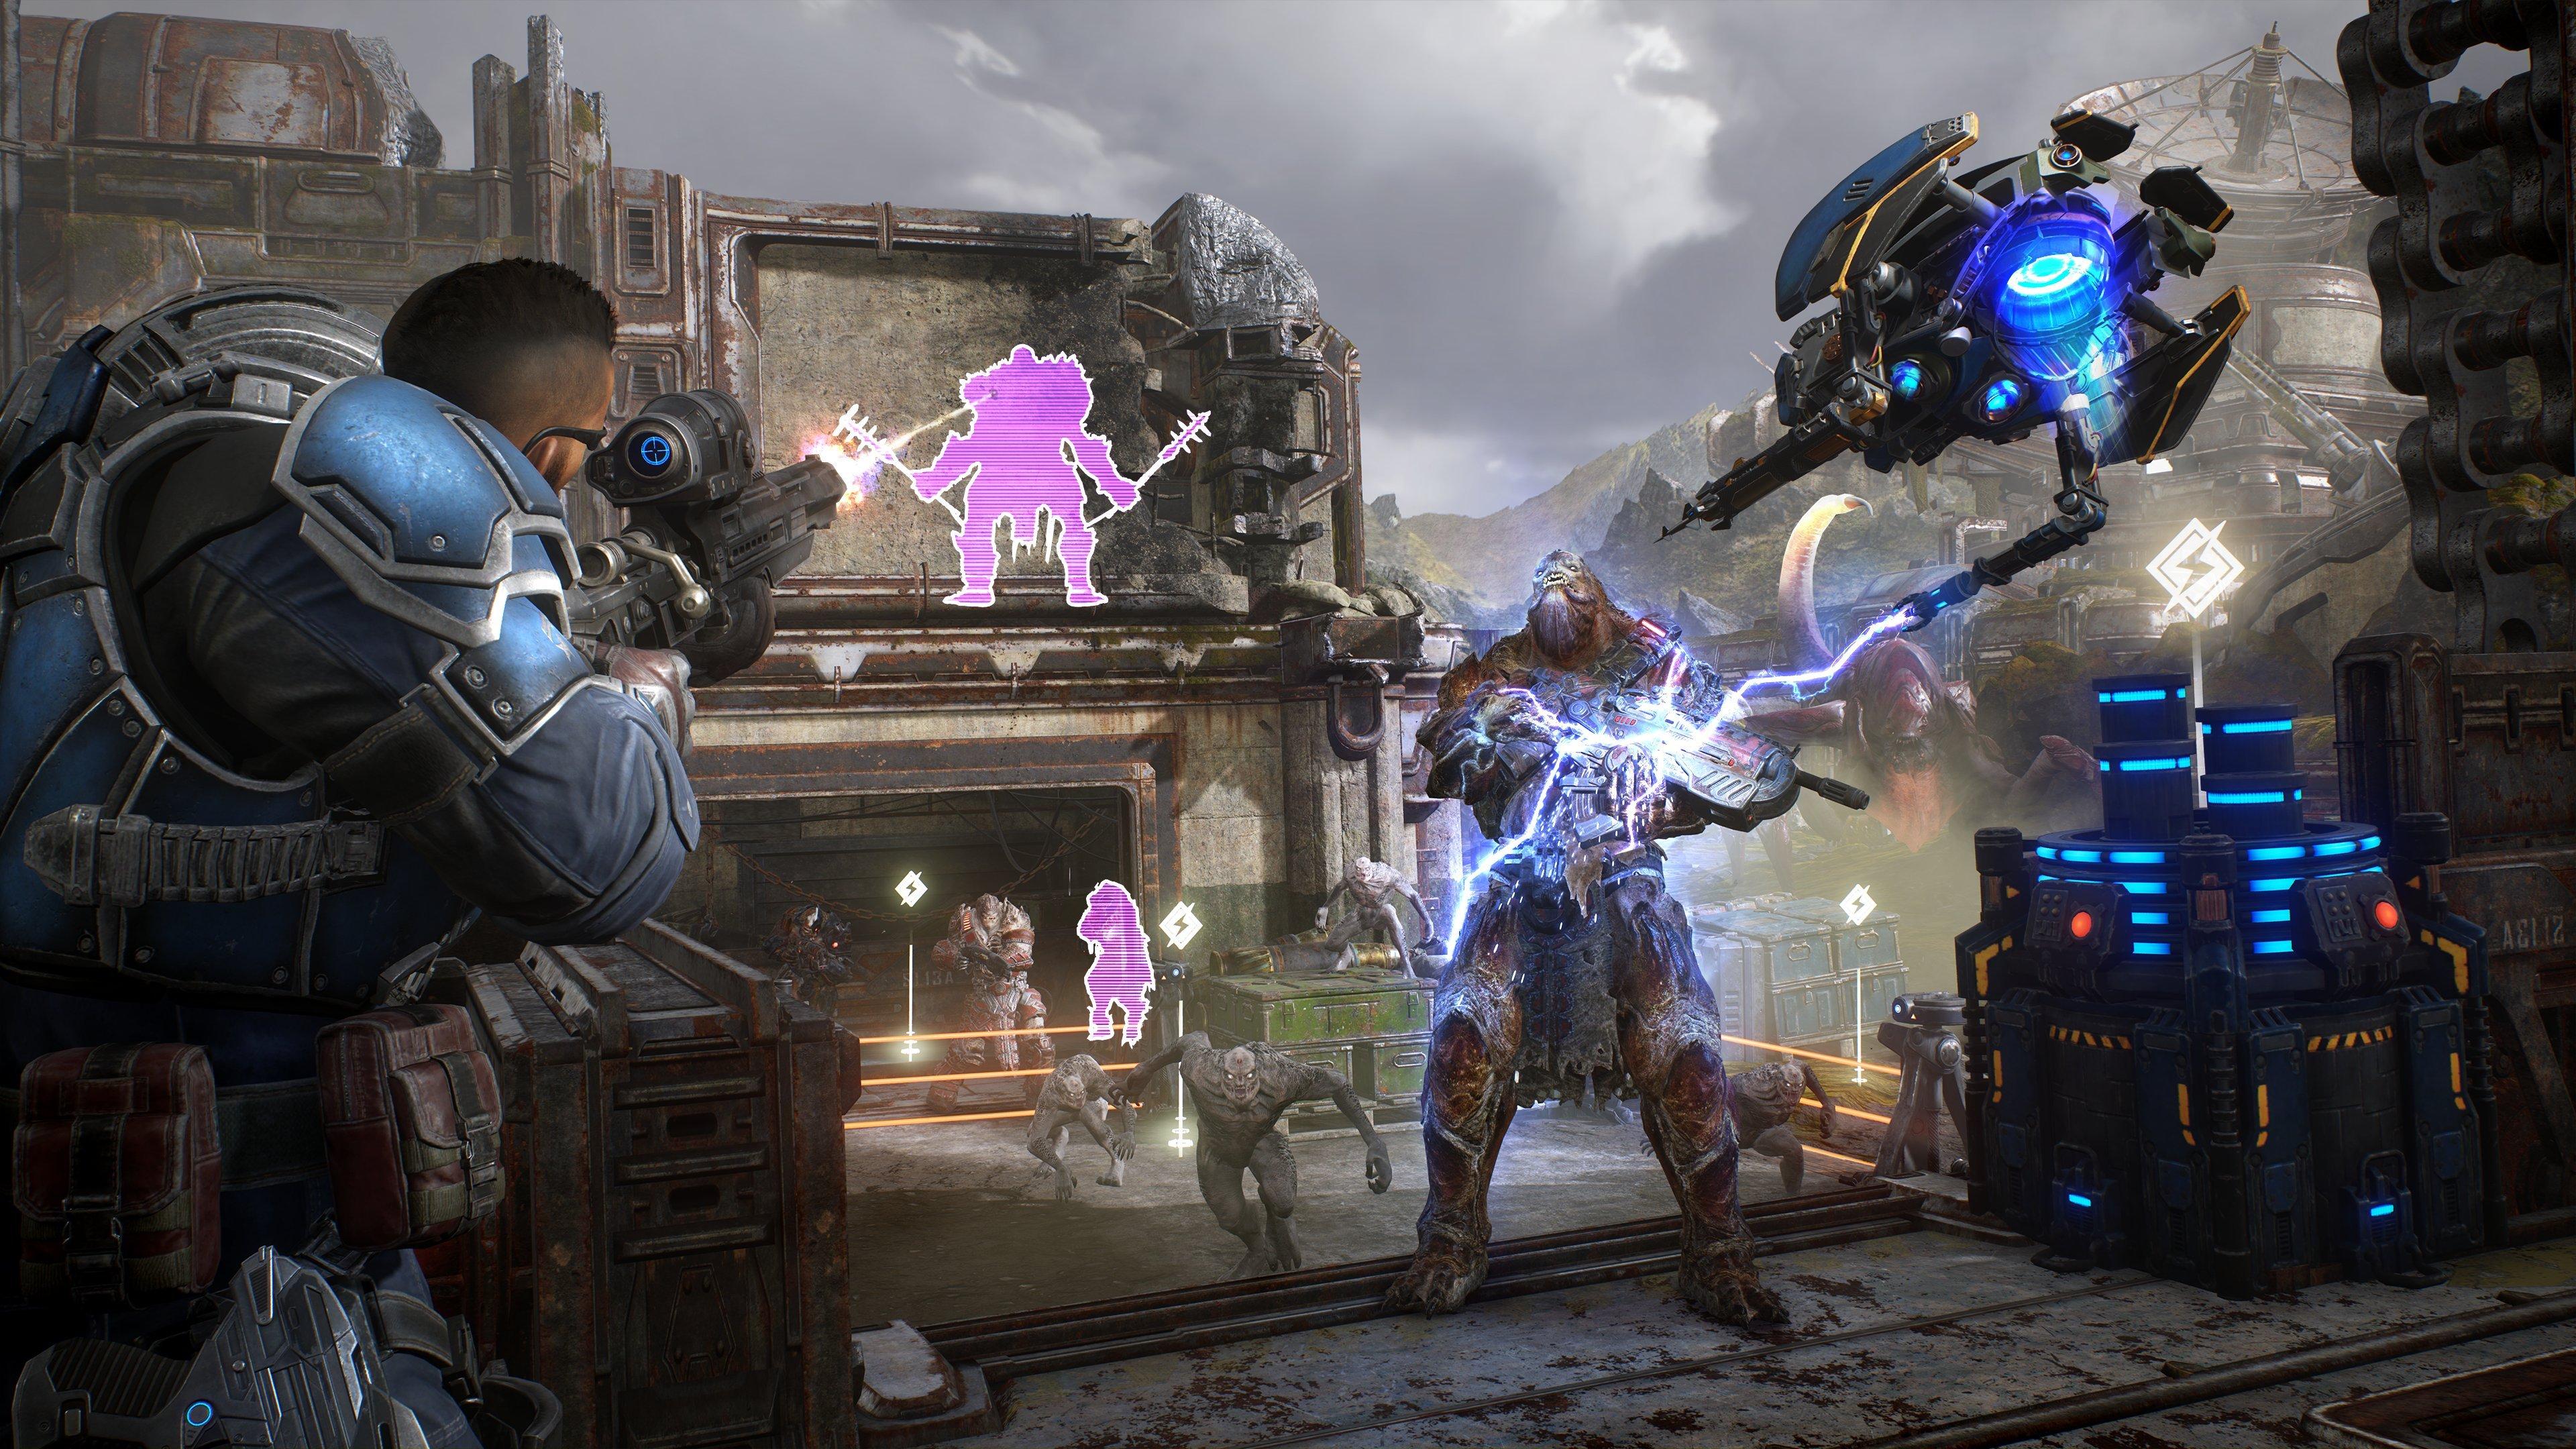 Gears 5 and Mods to be Cross-Played for Xbox One and PC - FOXNGAME